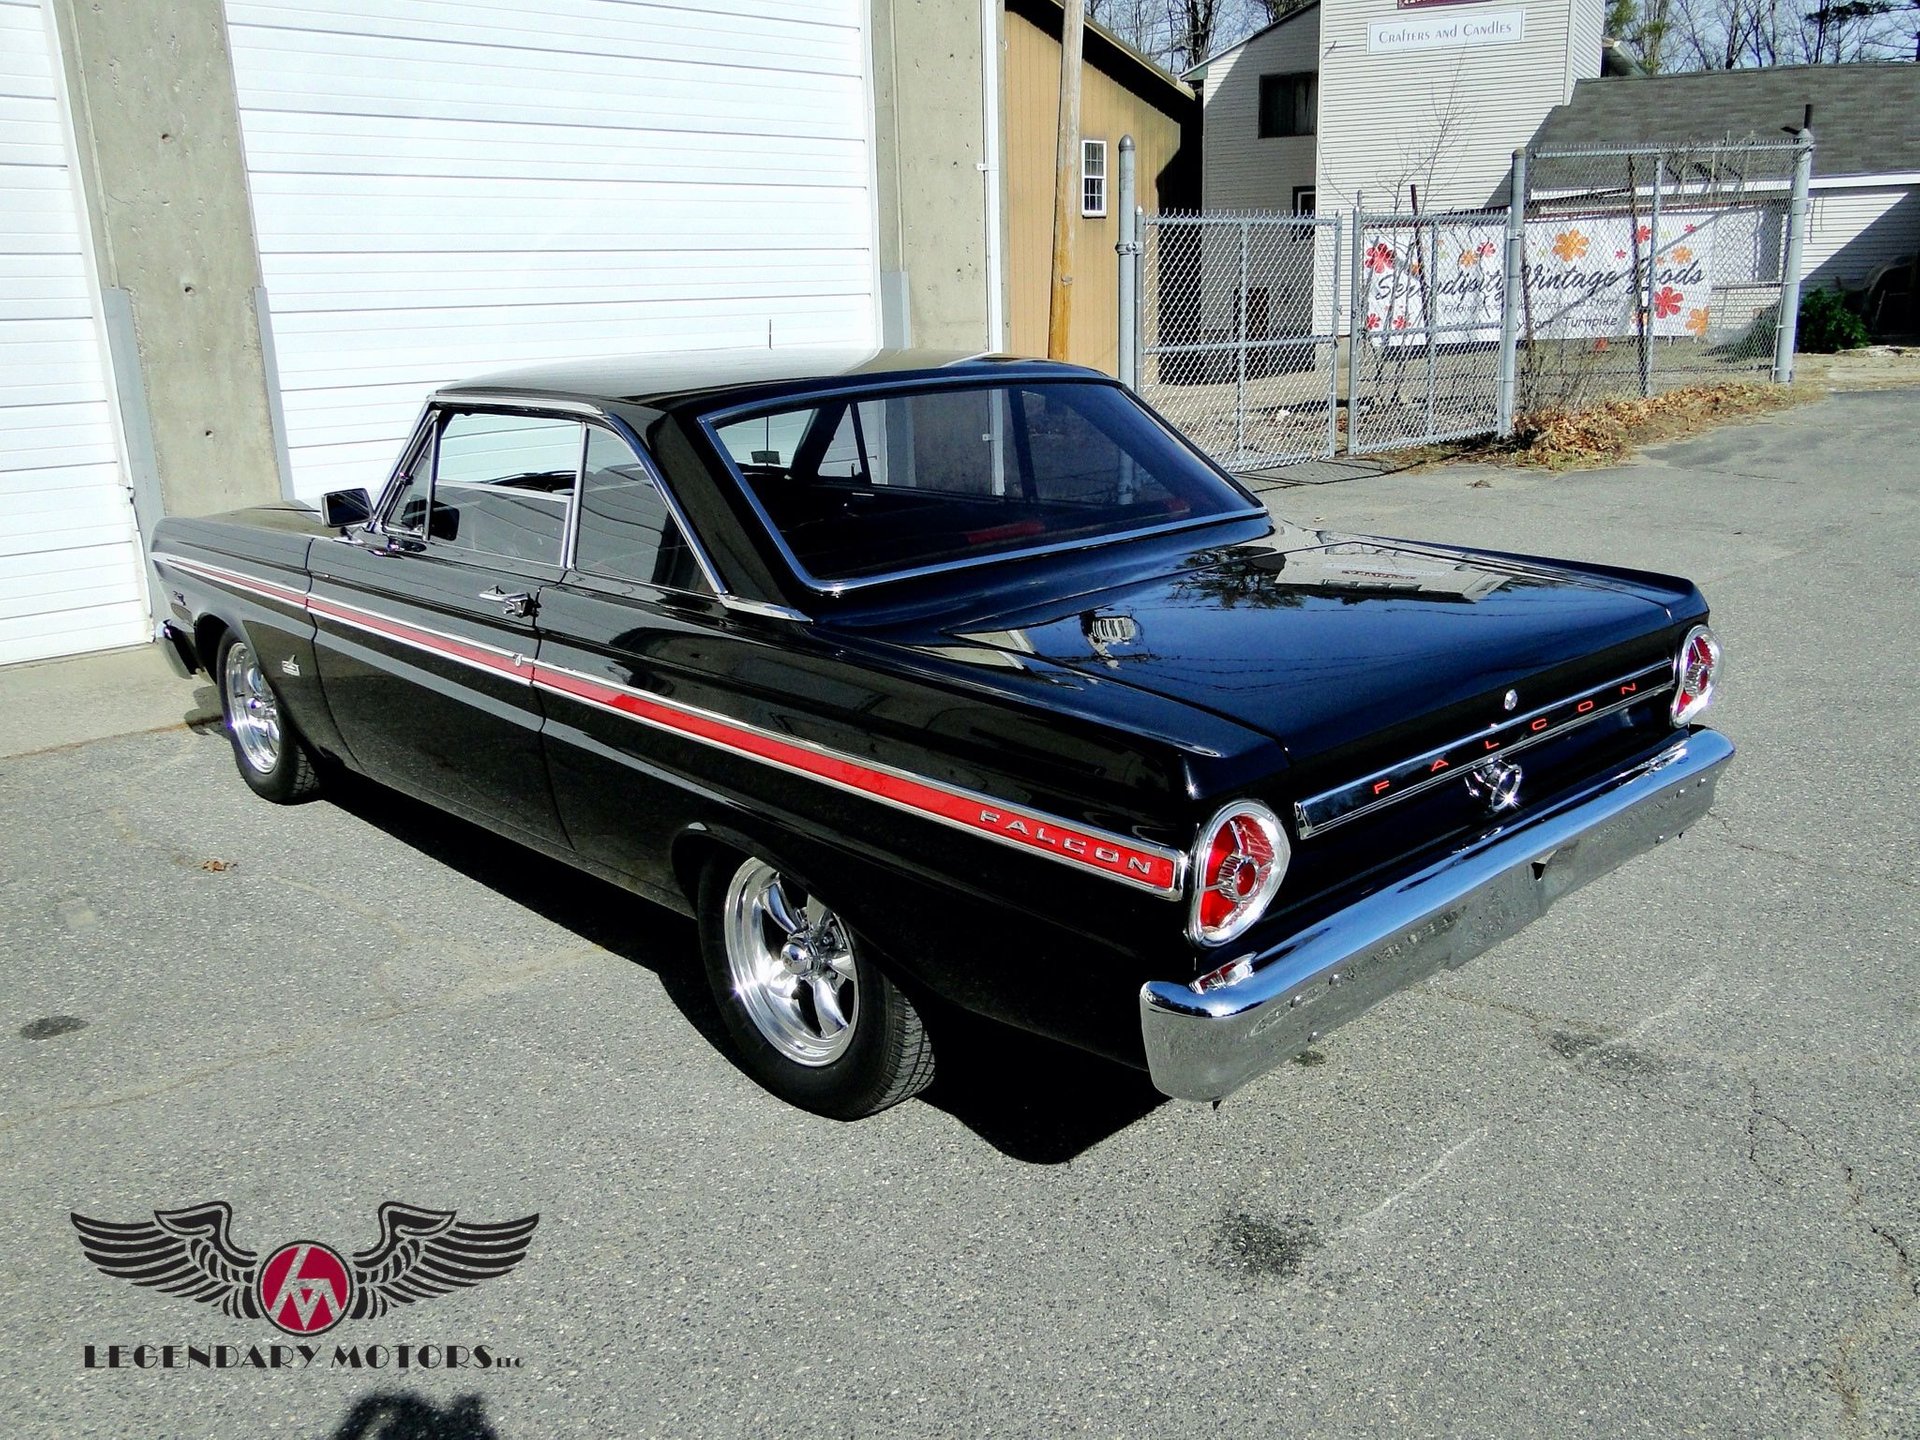 1965 Ford Falcon Legendary Motors Classic Cars Muscle Cars Hot